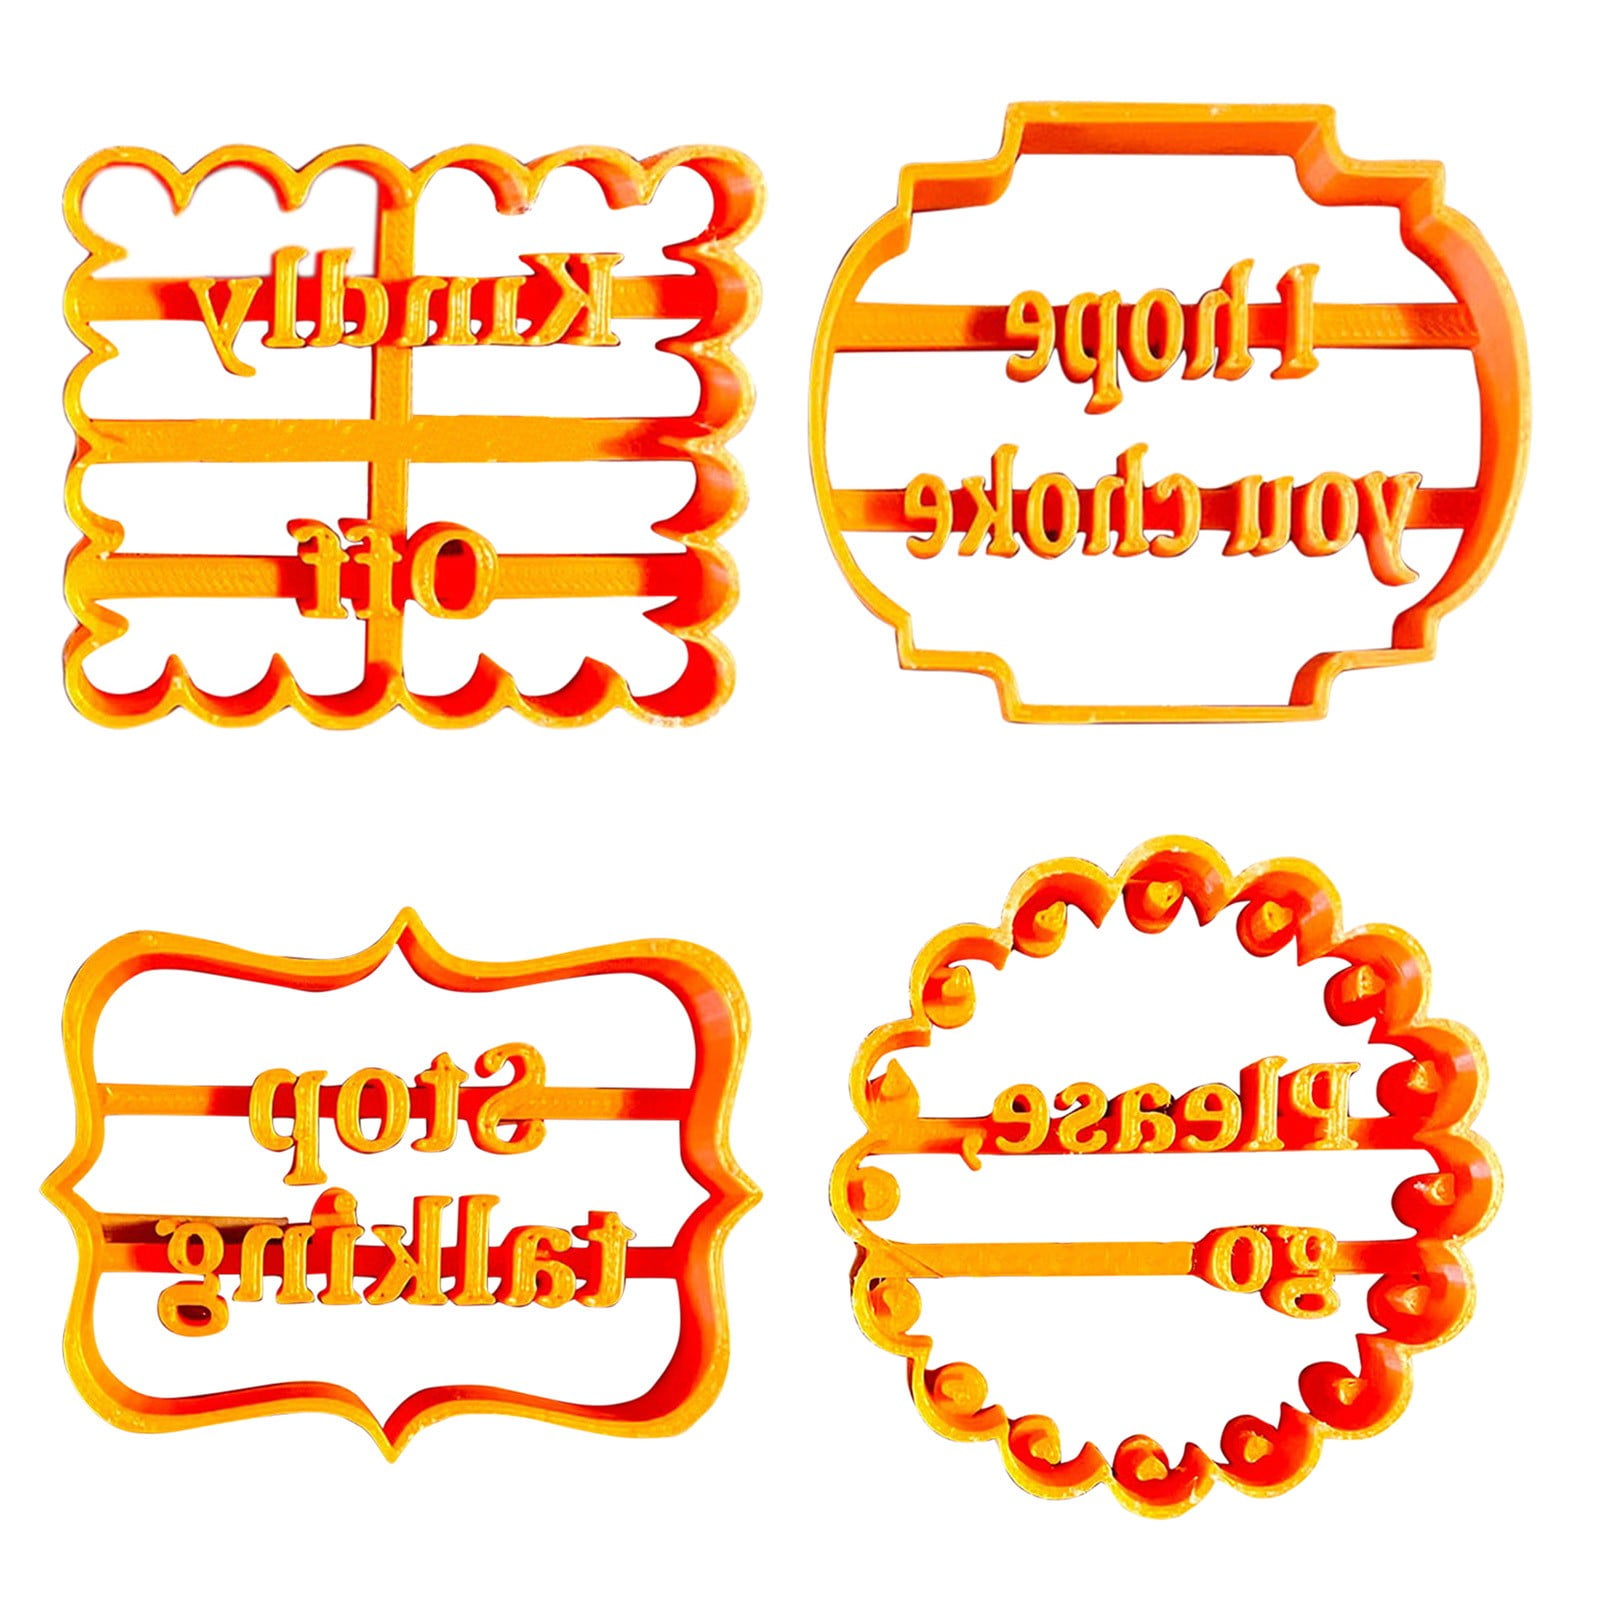 1//4PCS Cookie Molds with Good Wishes Alphabet for Cookie Baking Biscuit Cutters